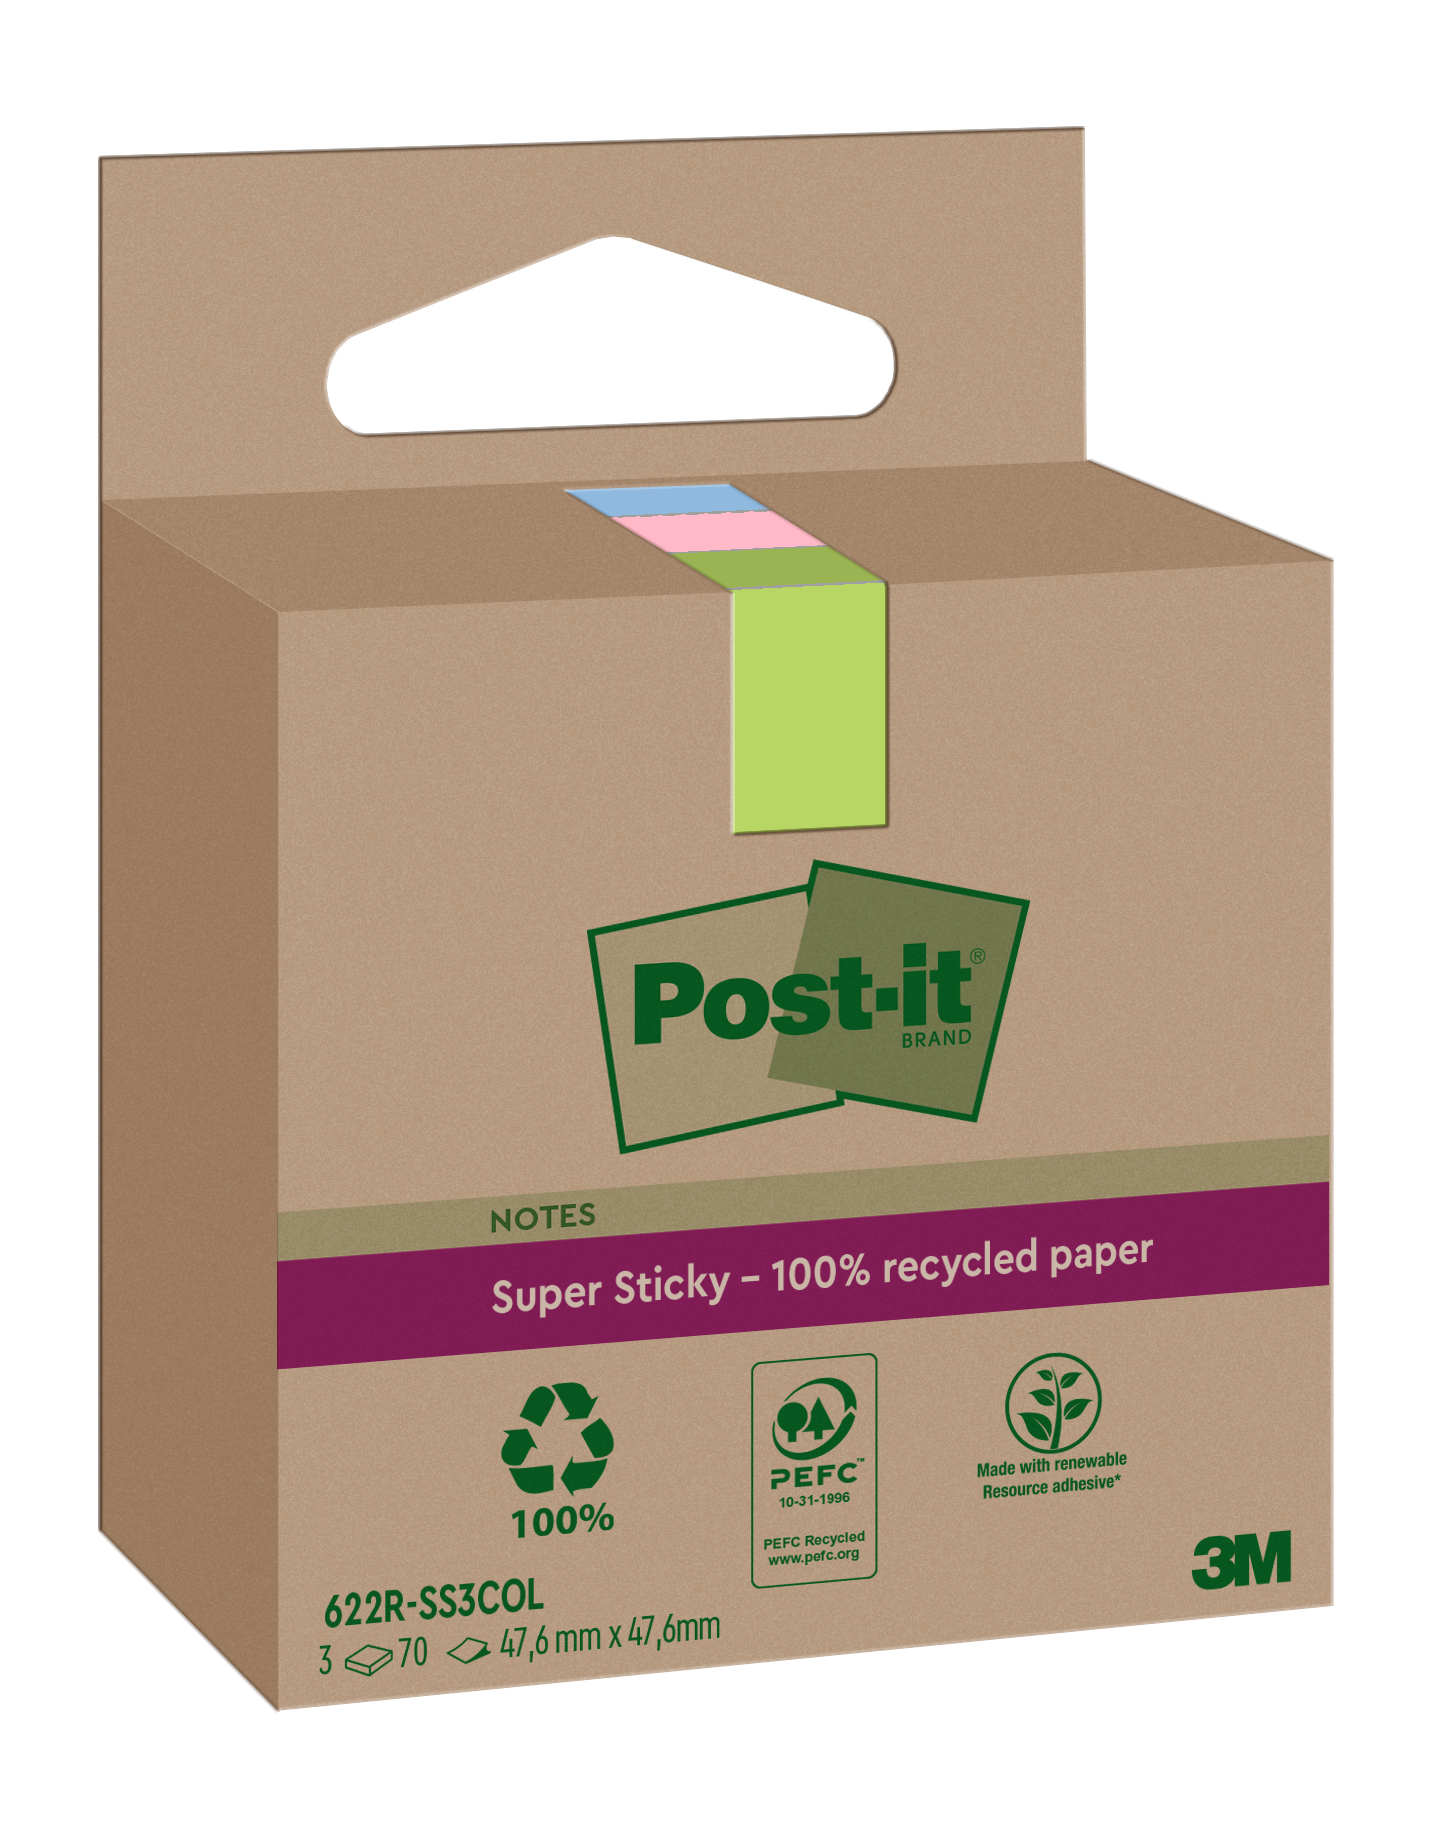 POST-IT SuperSticky Notes 47.6x47.6mm 622 RSS3COL Recycling,assort. 3x70 flls.